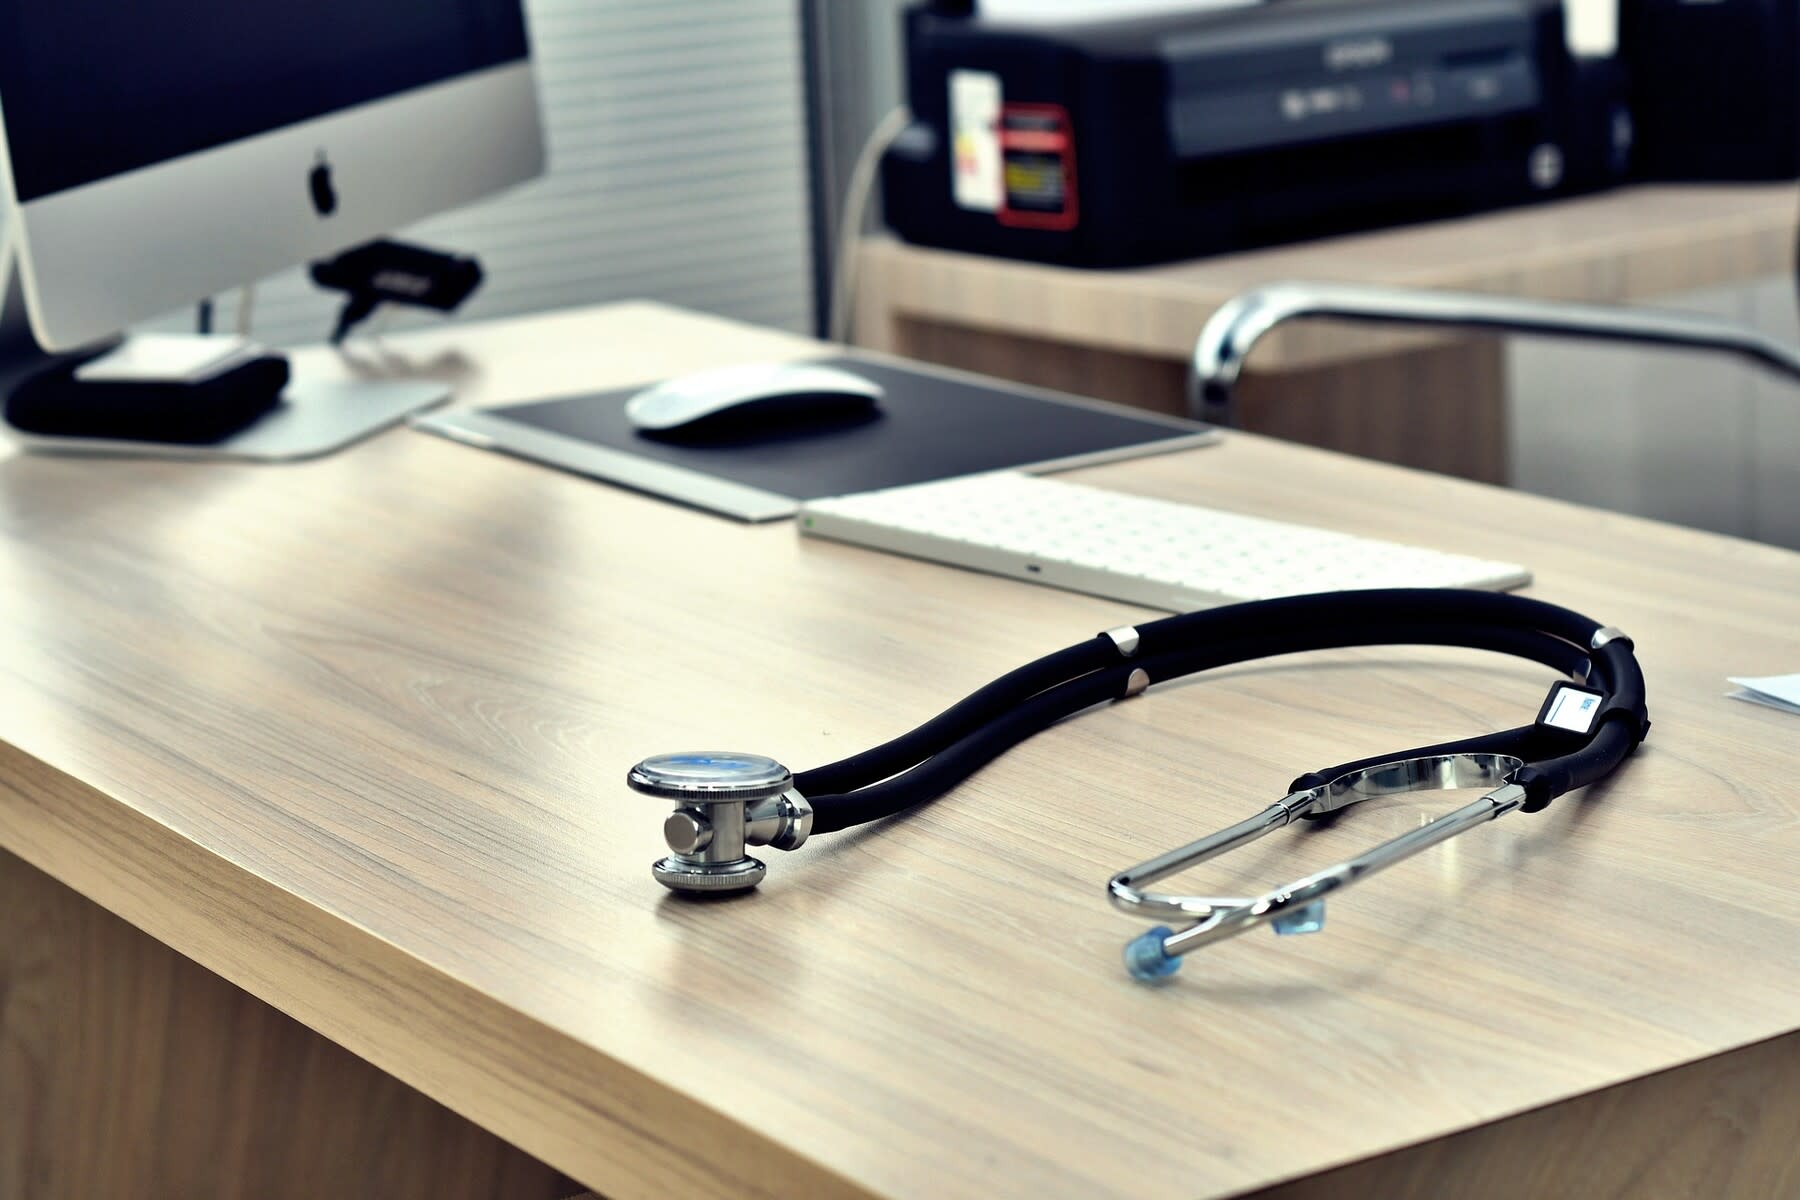 Stethoscope on a wooden desk, right next to a desktop monitor and keyboard